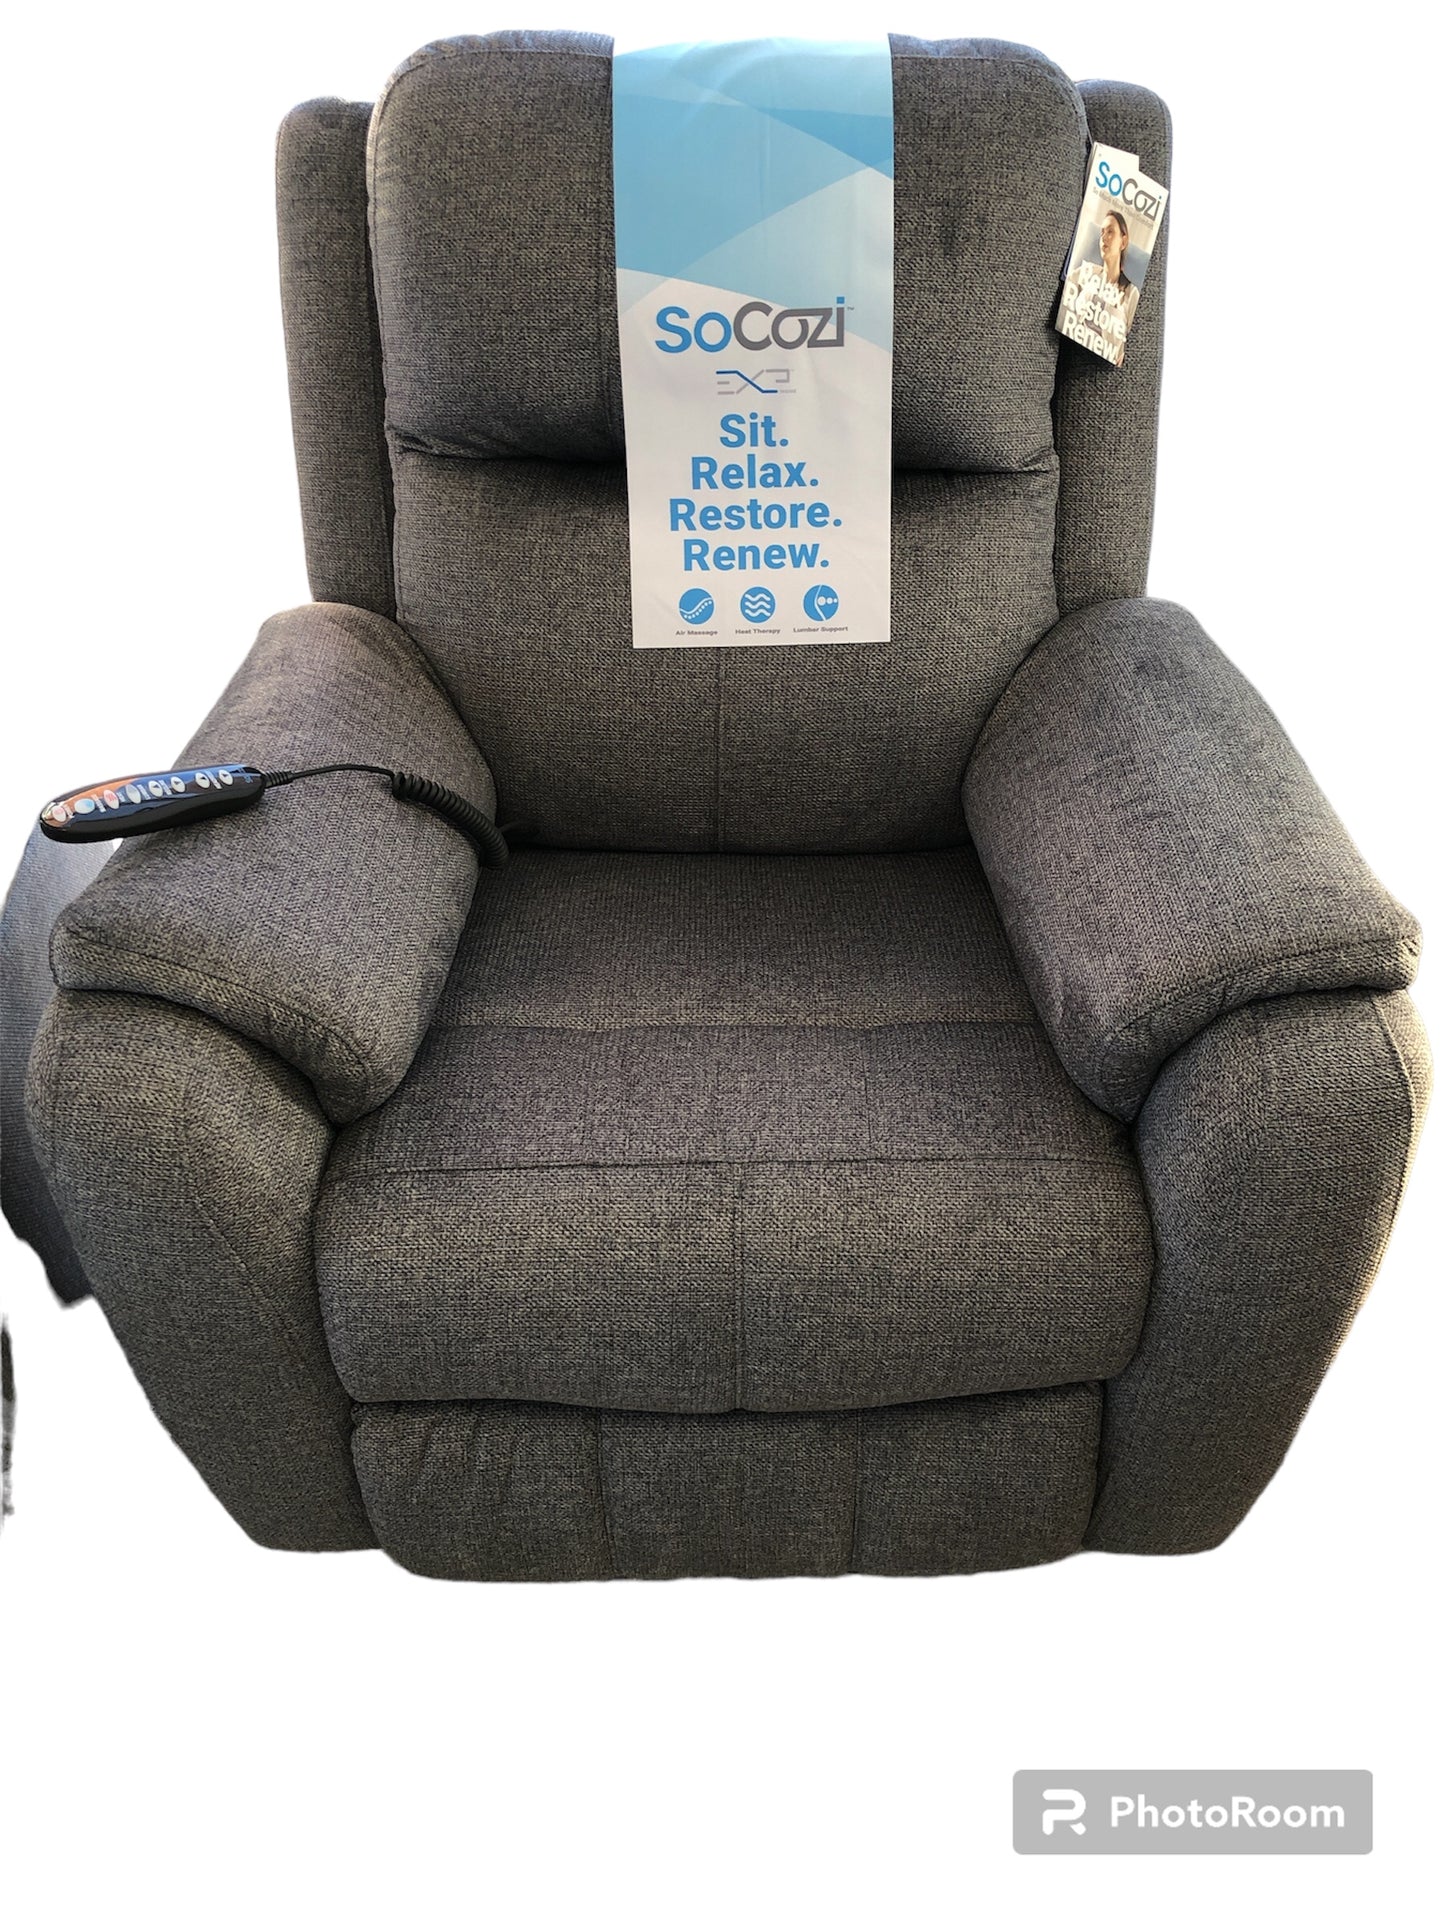 SoCozi Recliner with heat. Clearance item!